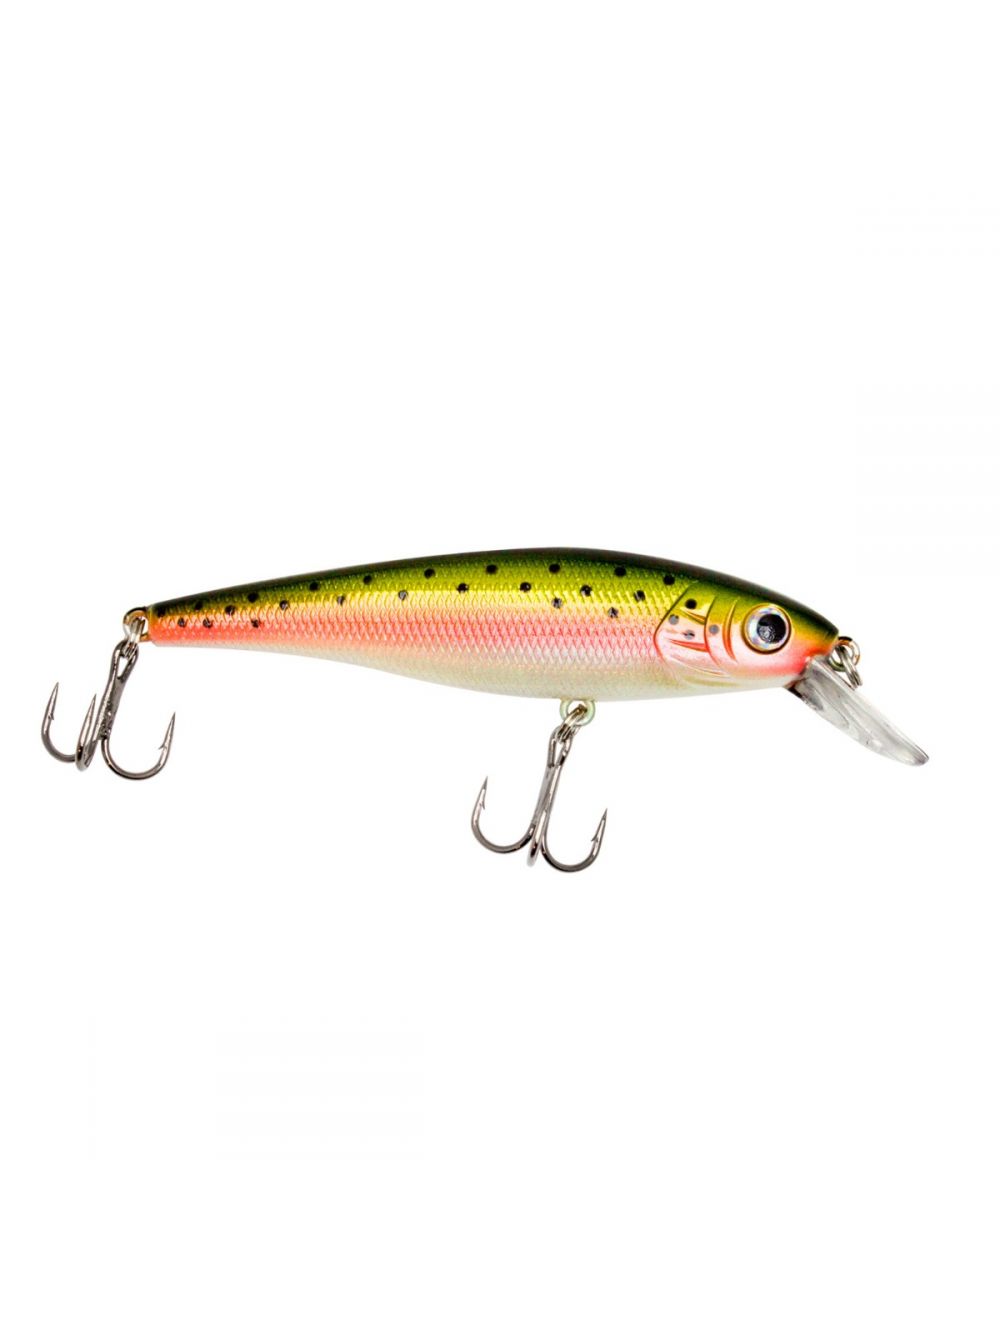  Trout Magnet TMC25BRKT Lelands Lures Magnet Crank Lure, 2.5,  Brook Trout : Fishing Topwater Lures And Crankbaits : Sports & Outdoors